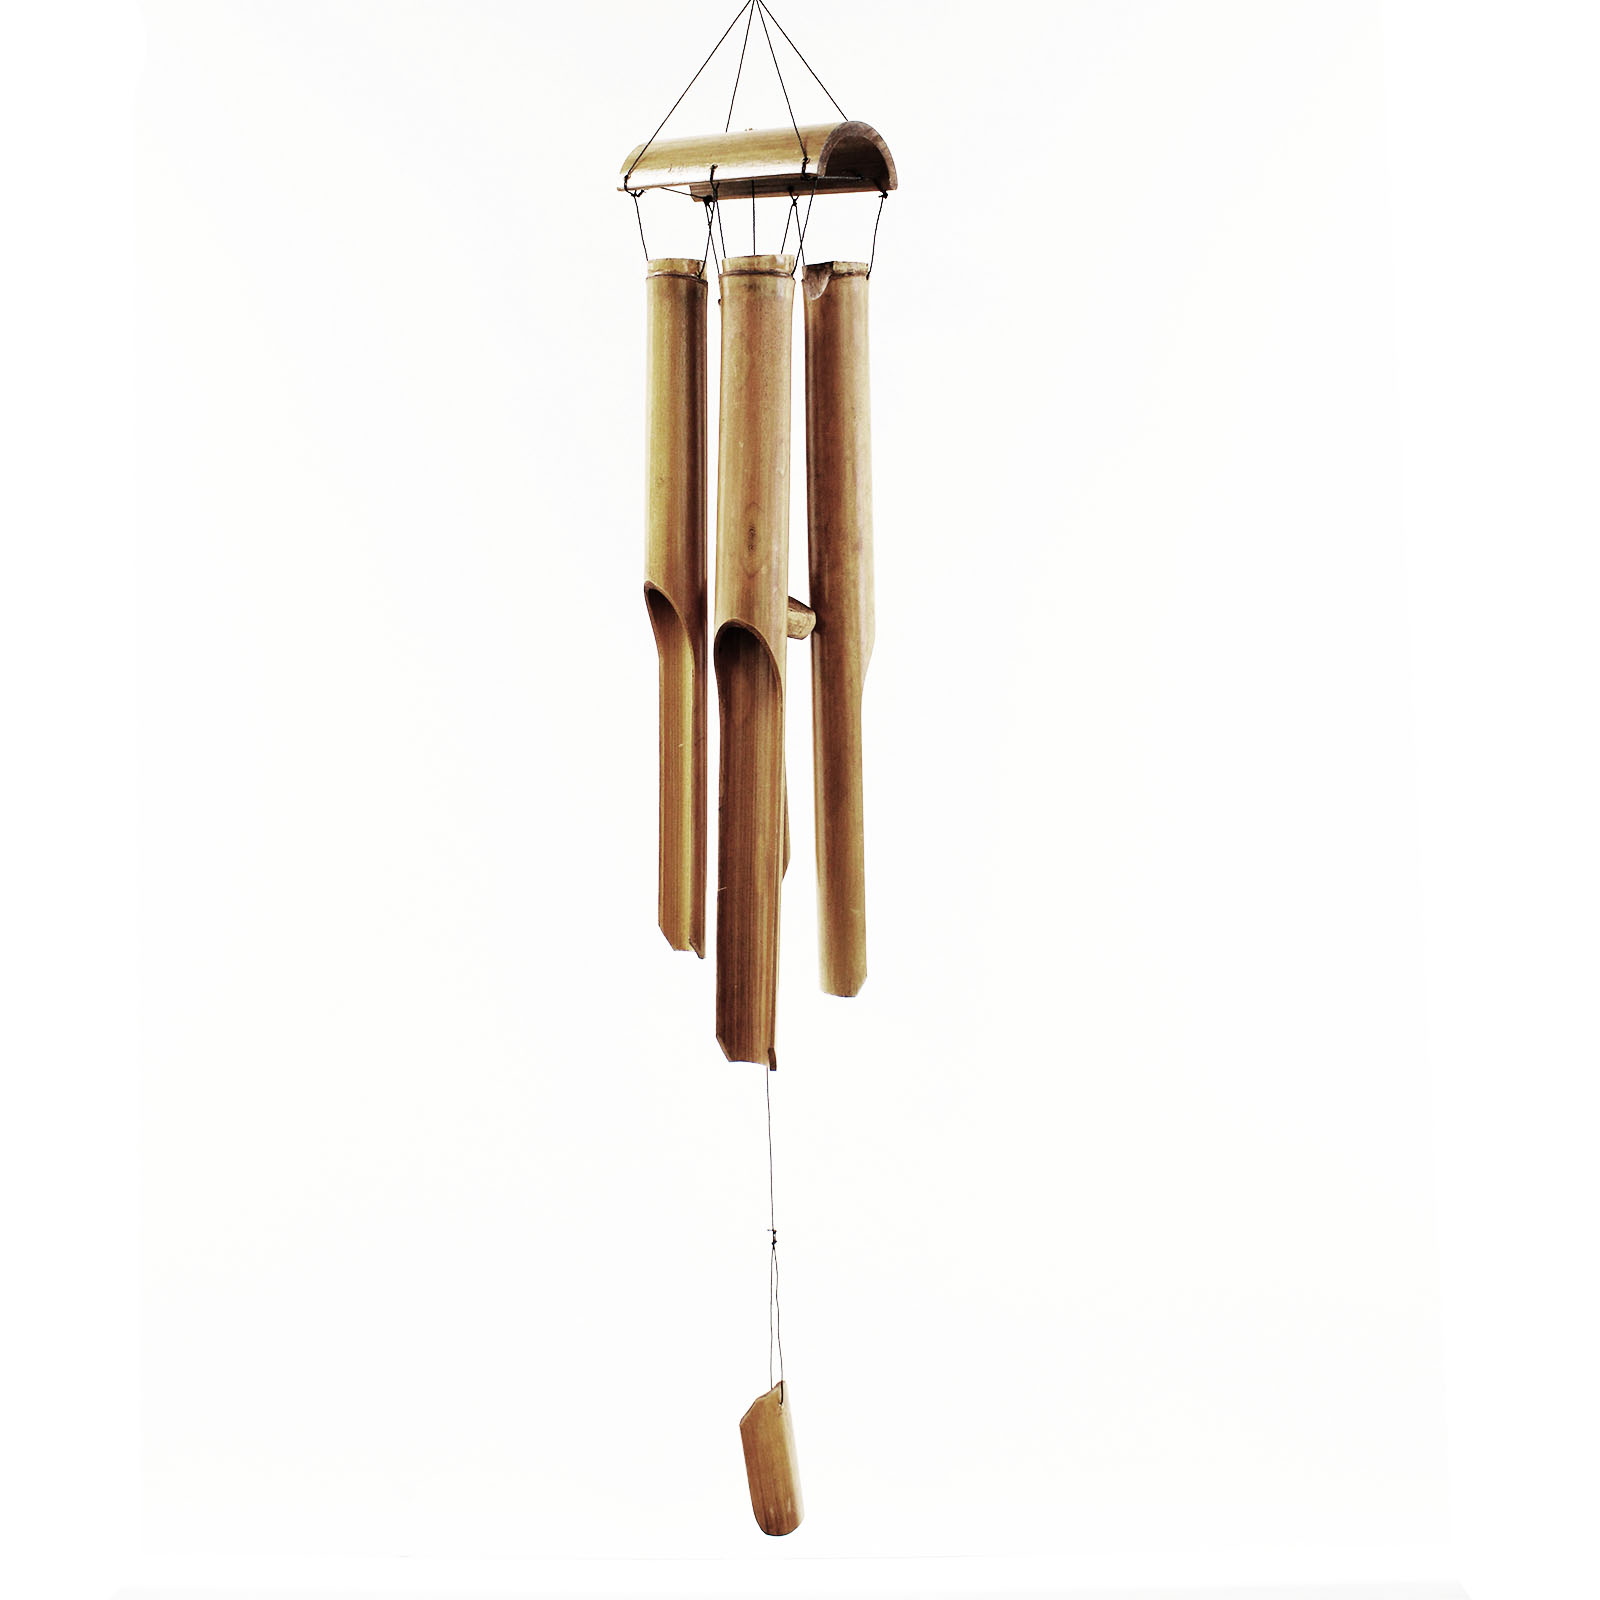 Bamboo Wind Chimes Natural Finish - 4 Tubes - Large